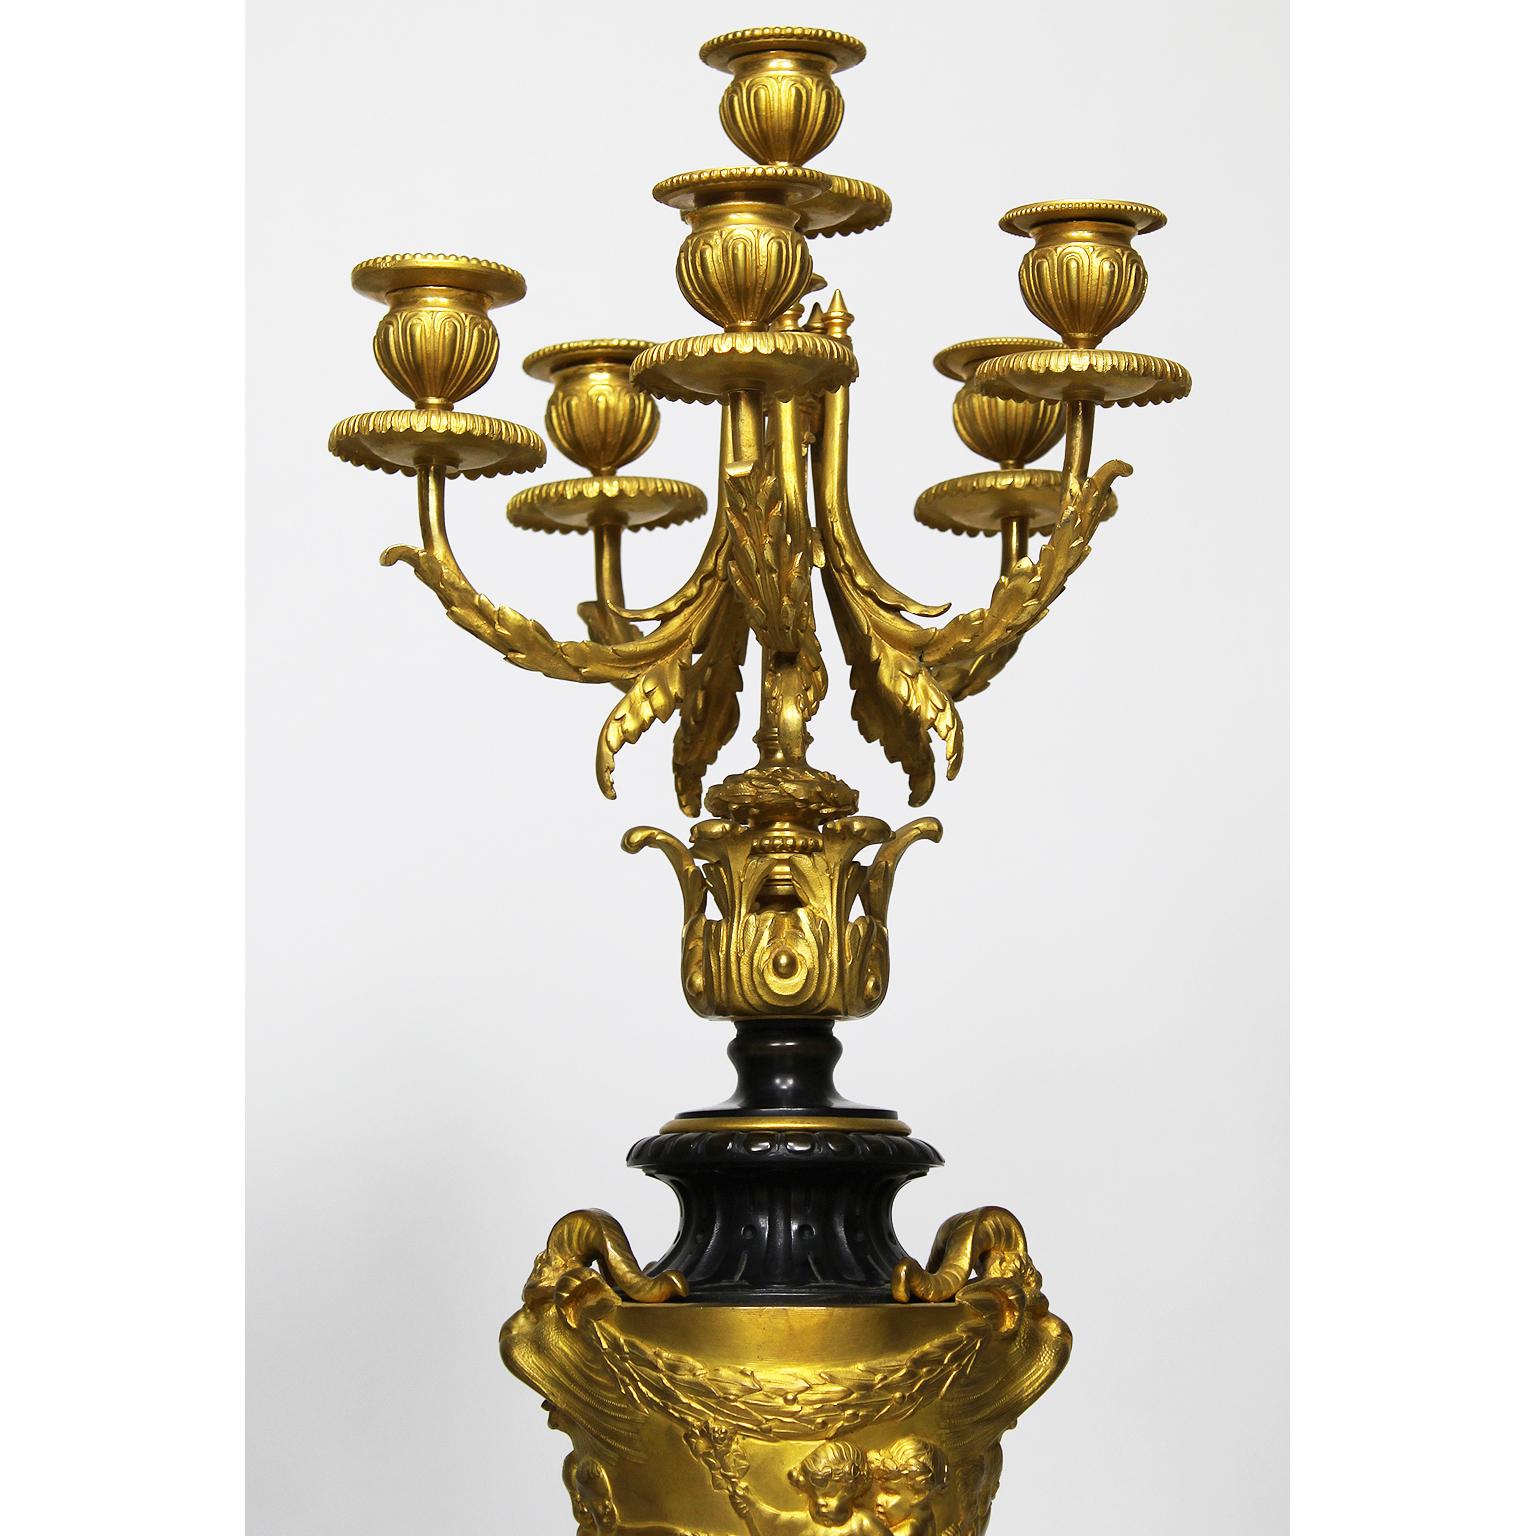 A fine pair of French 19th century Rococo Revival style gilt bronze and Rouge Griotte marble six-light candelabra attributed to Ferdinand Barbedienne (French, 1810-1892) After a model by Claude Michel (French, 1738-1814) known as Clodion. The